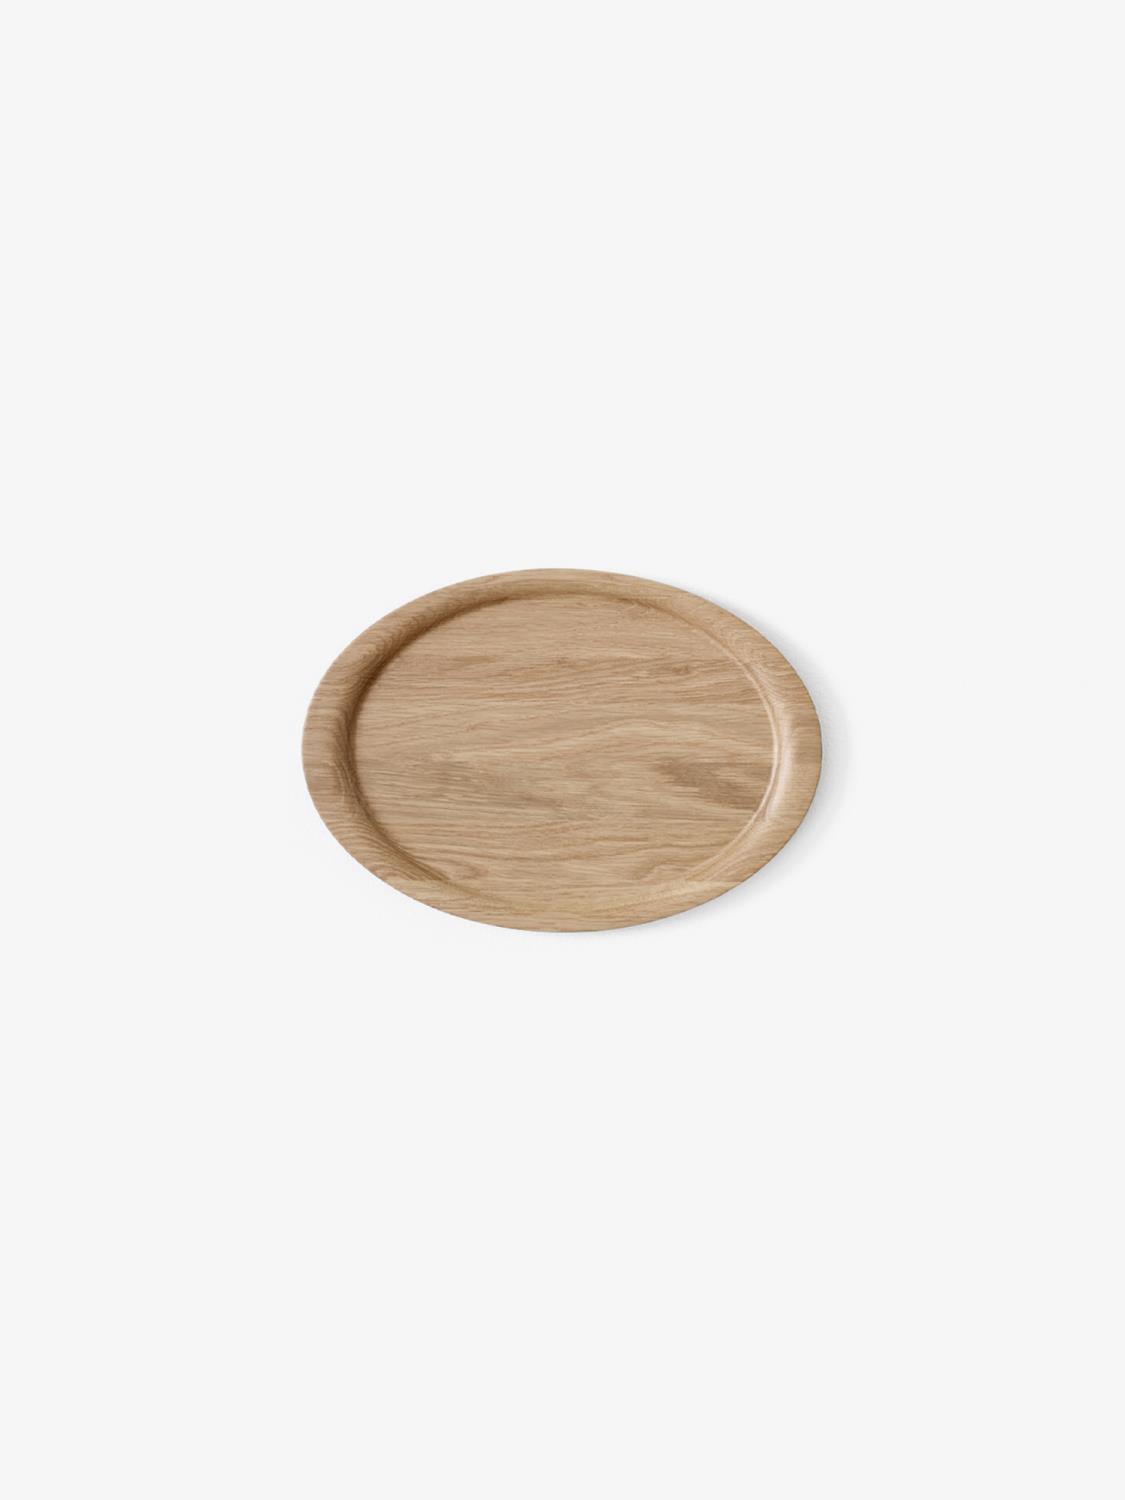 &Tradition - Collect Tray SC64 - Lacquered Oak